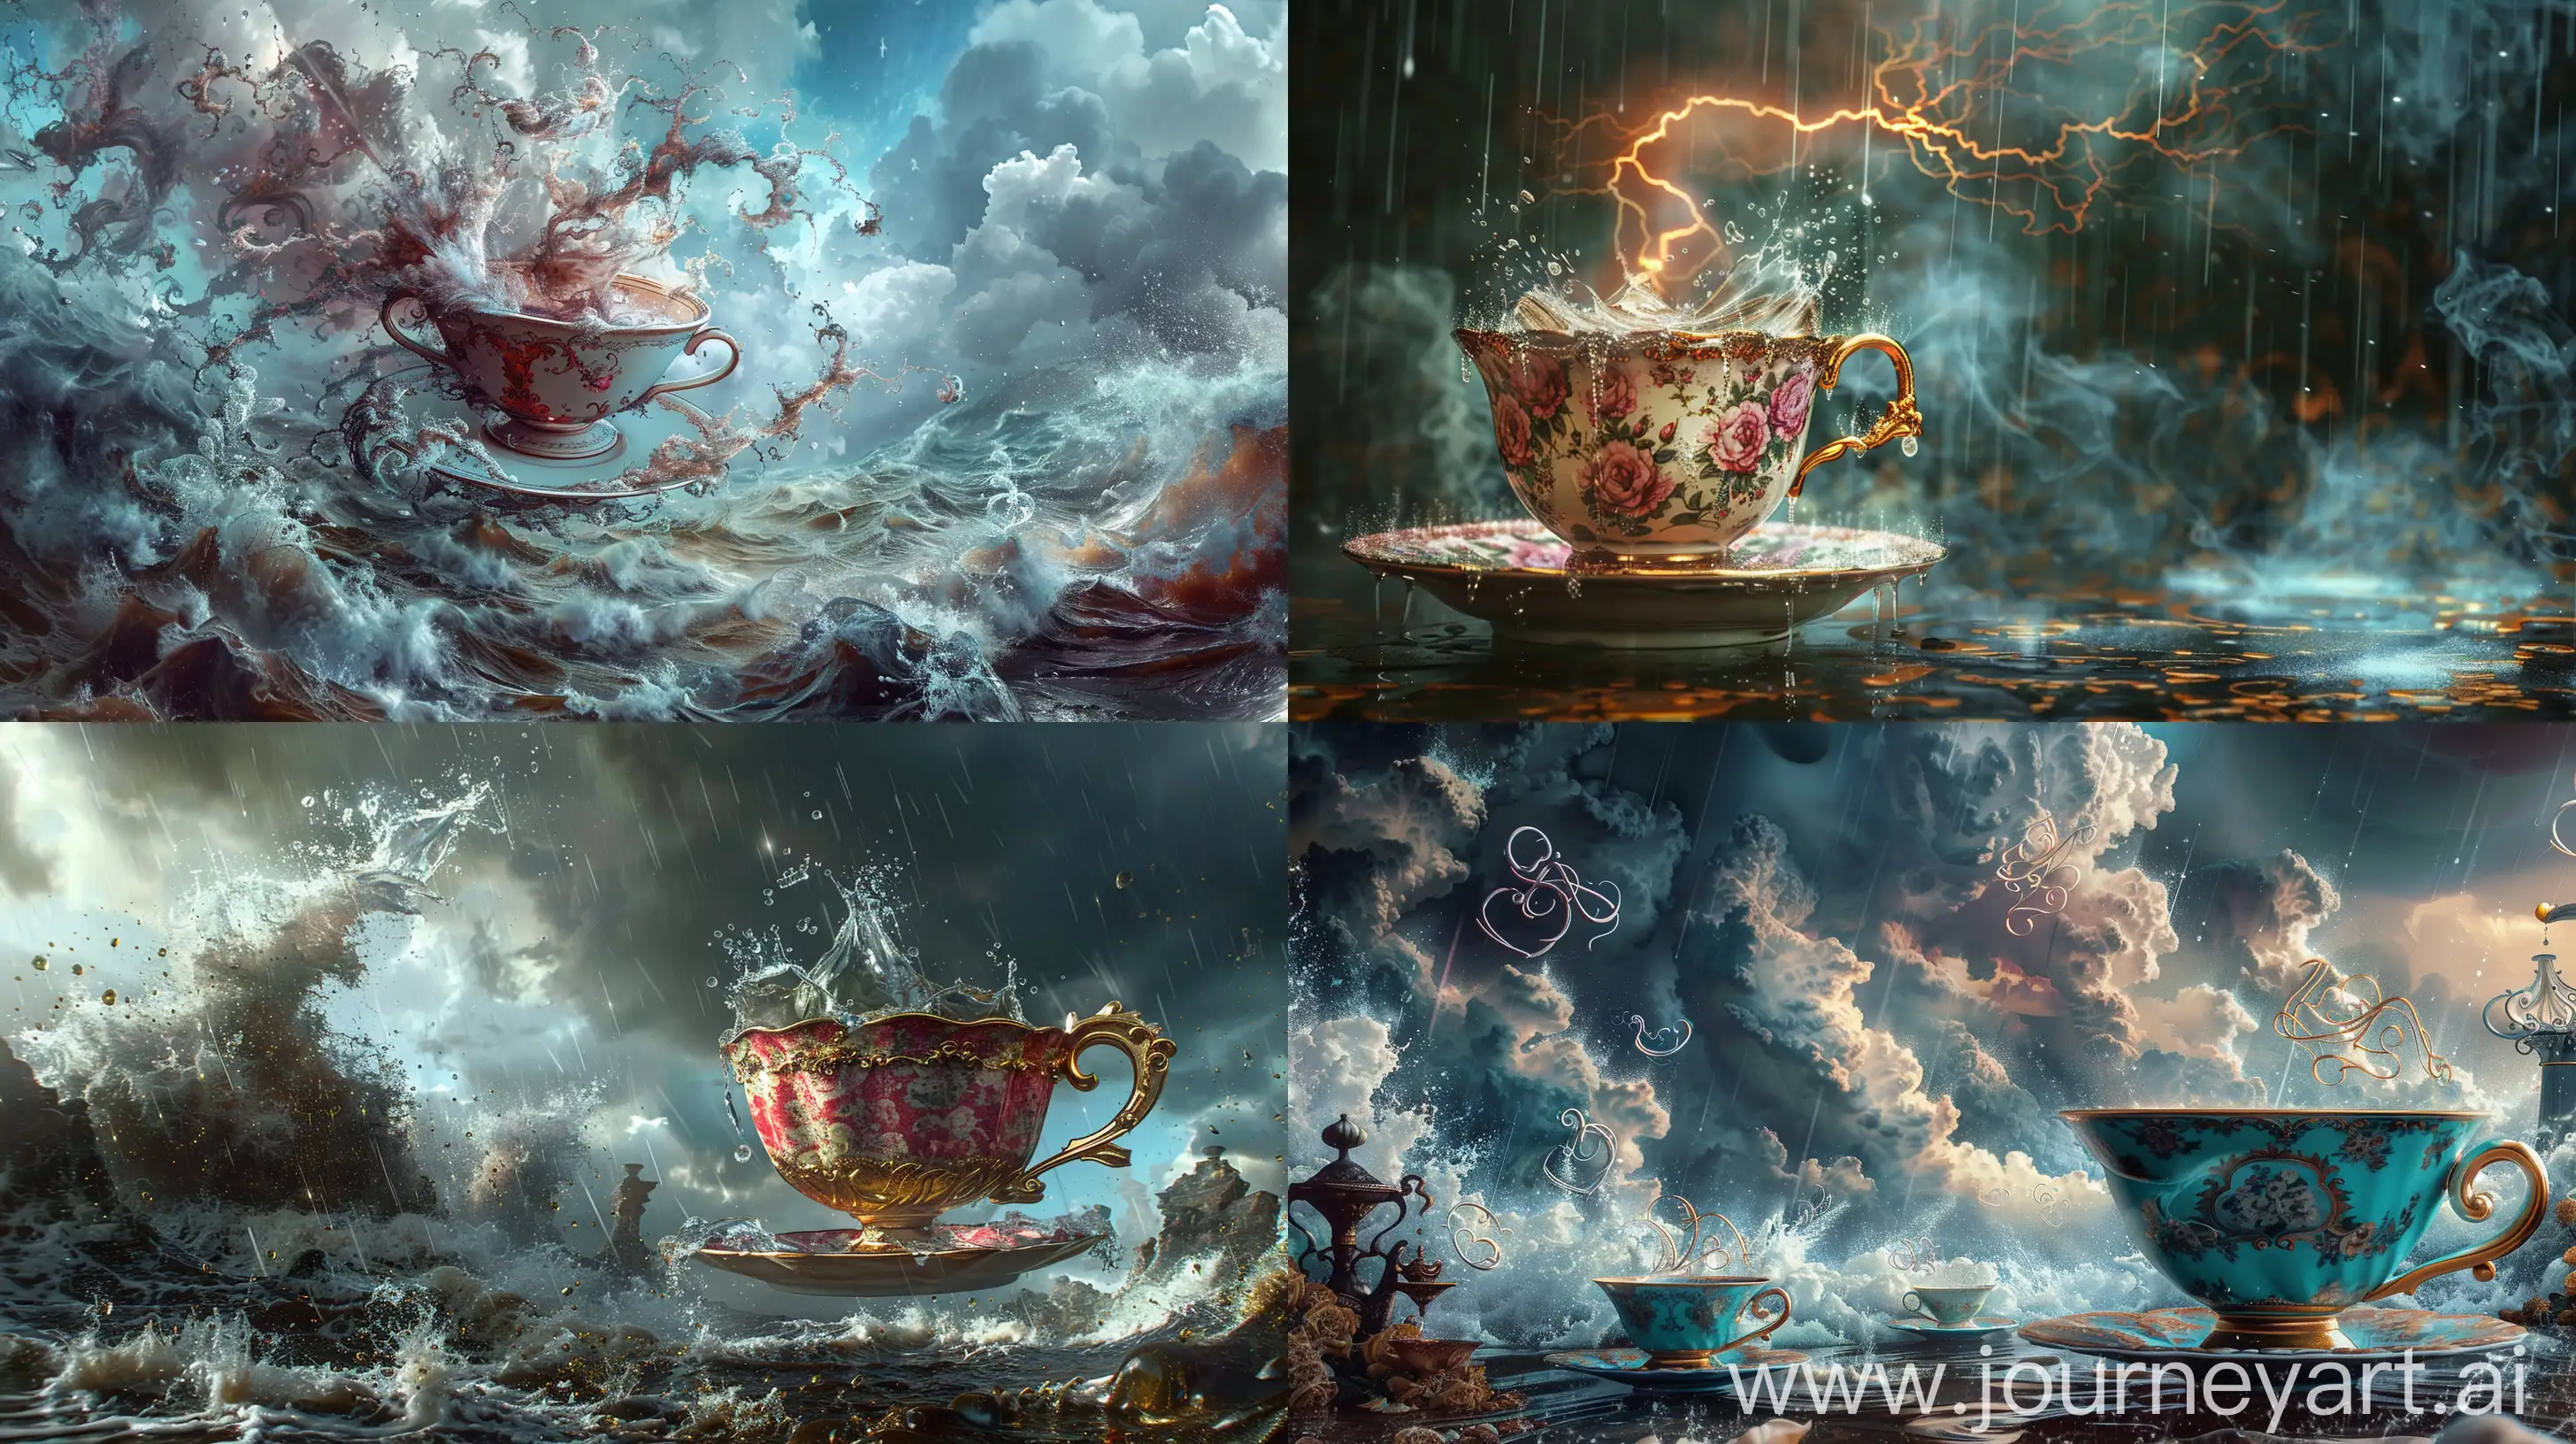 HyperDetailed-Storm-in-a-Teacup-Intricate-Scene-Depiction